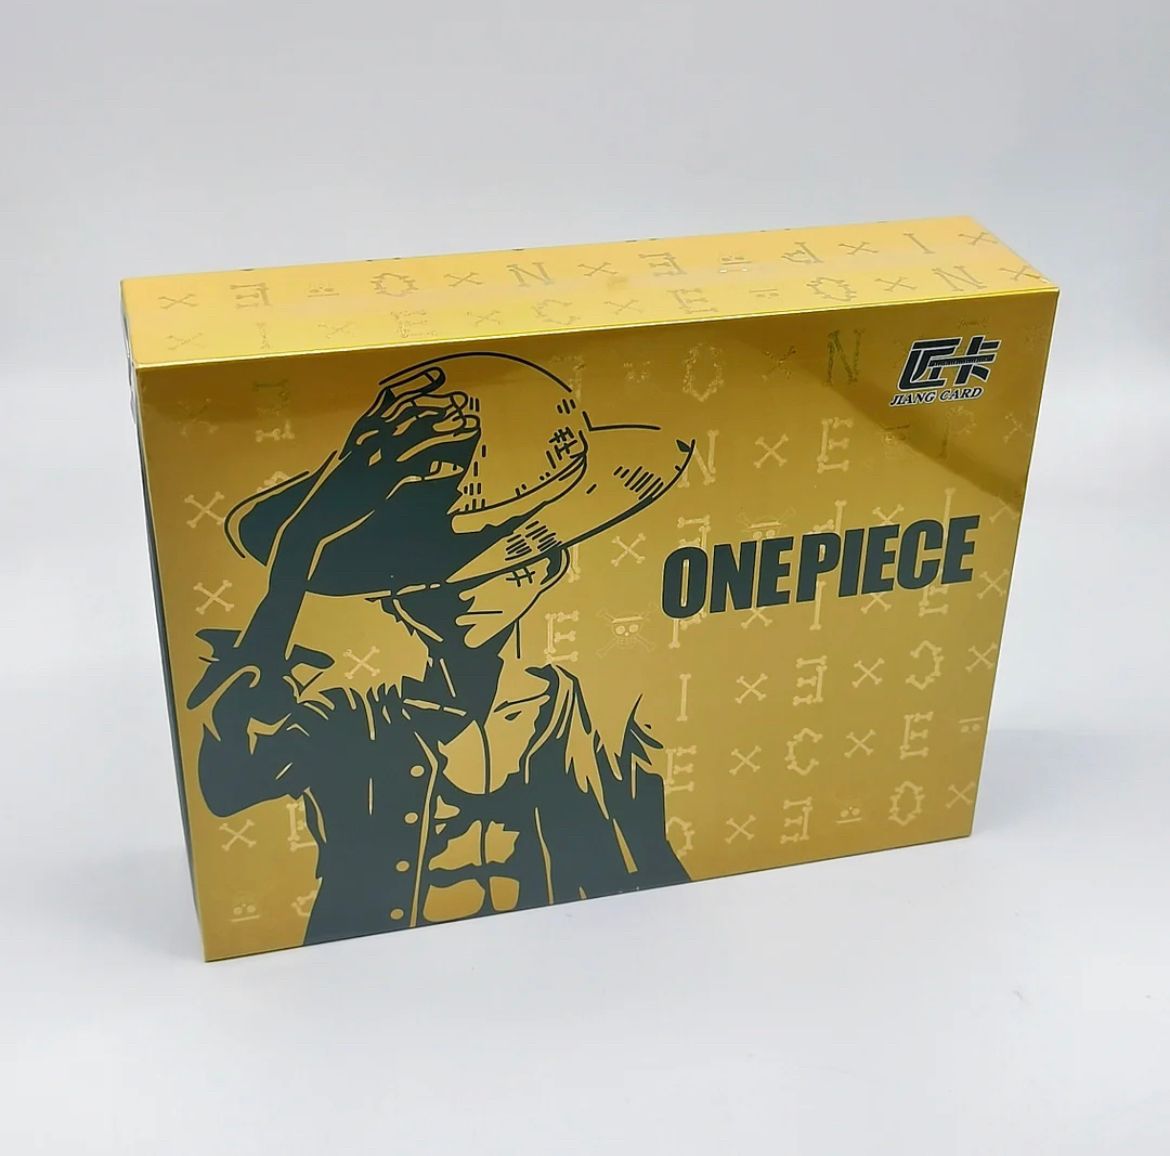 Booster-Jiangka One Piece Box Collection Card